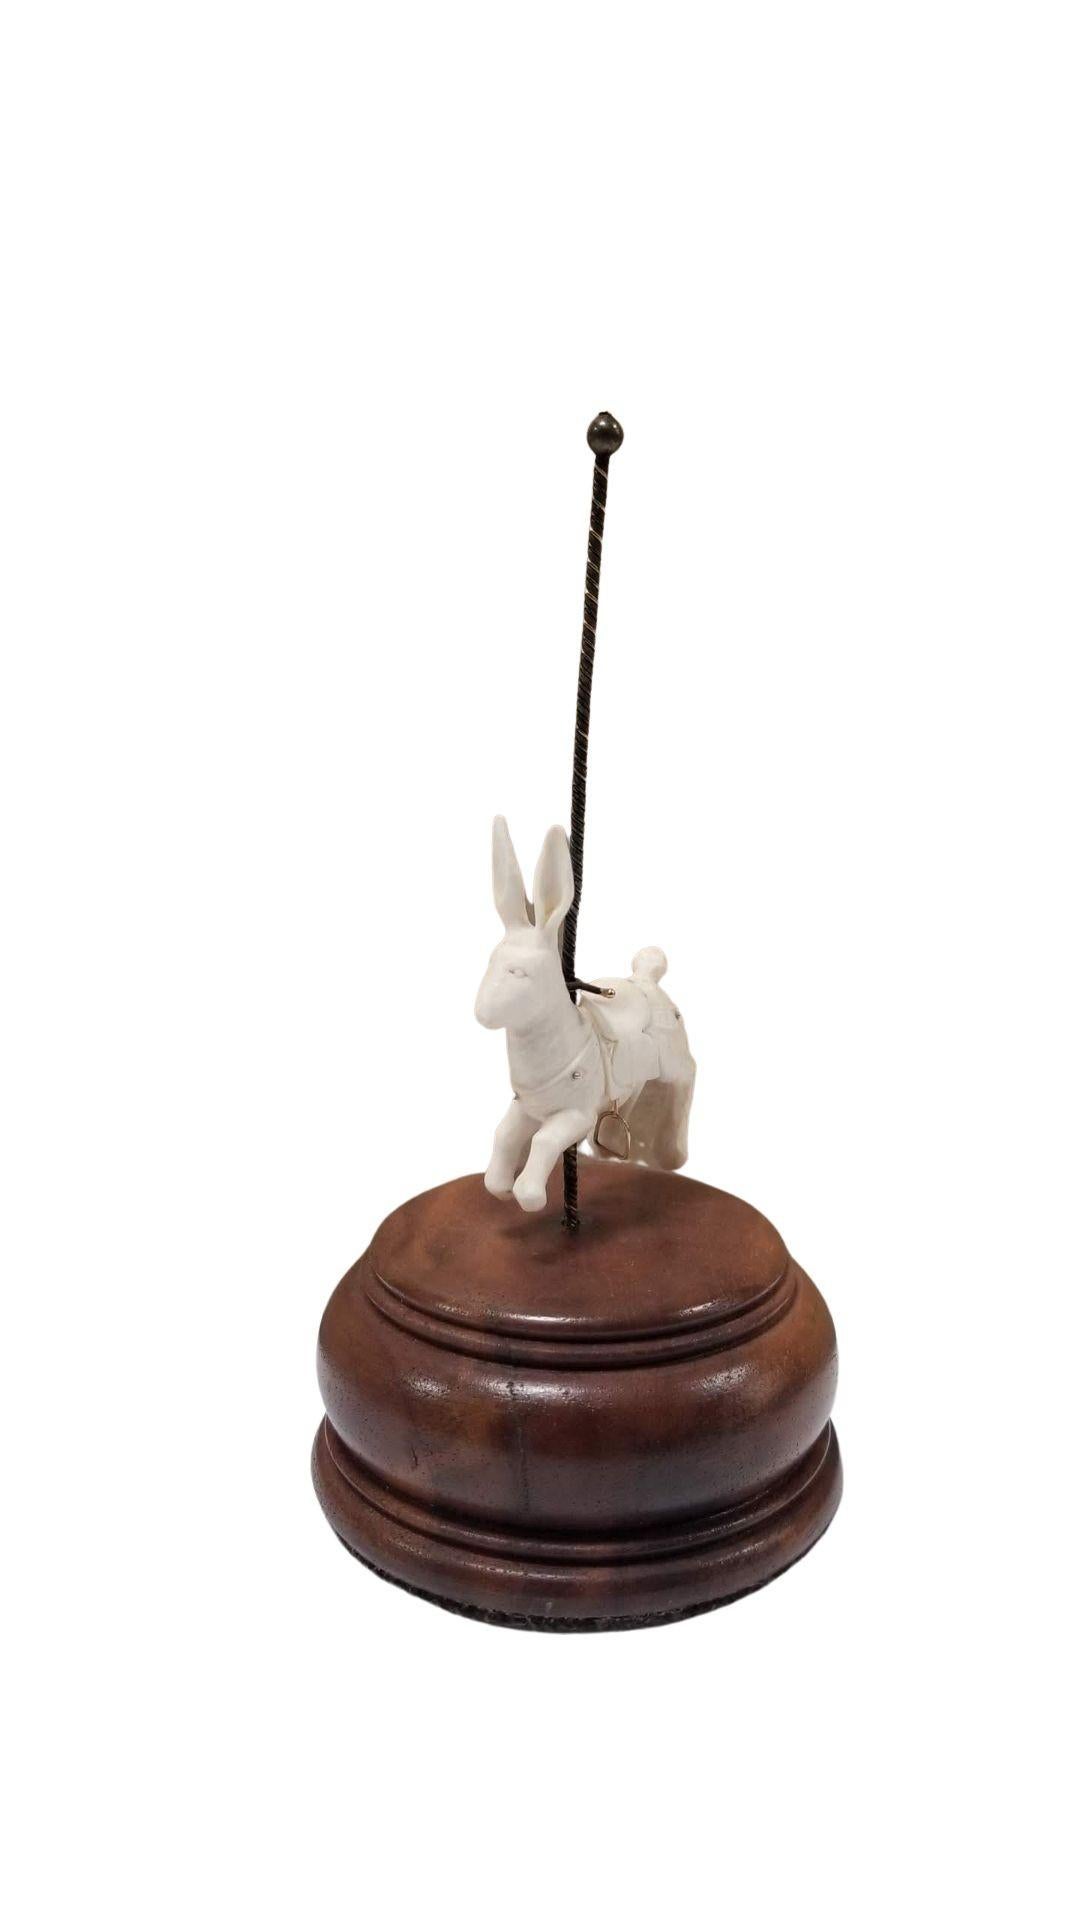 Handmade carving of a carousel rabbit carved out of bone by jewelry artist Chris Miller from his Pal Moon studio. Can be used as a ring and jewelry stack stand.
Signed: Chris Miller 1980